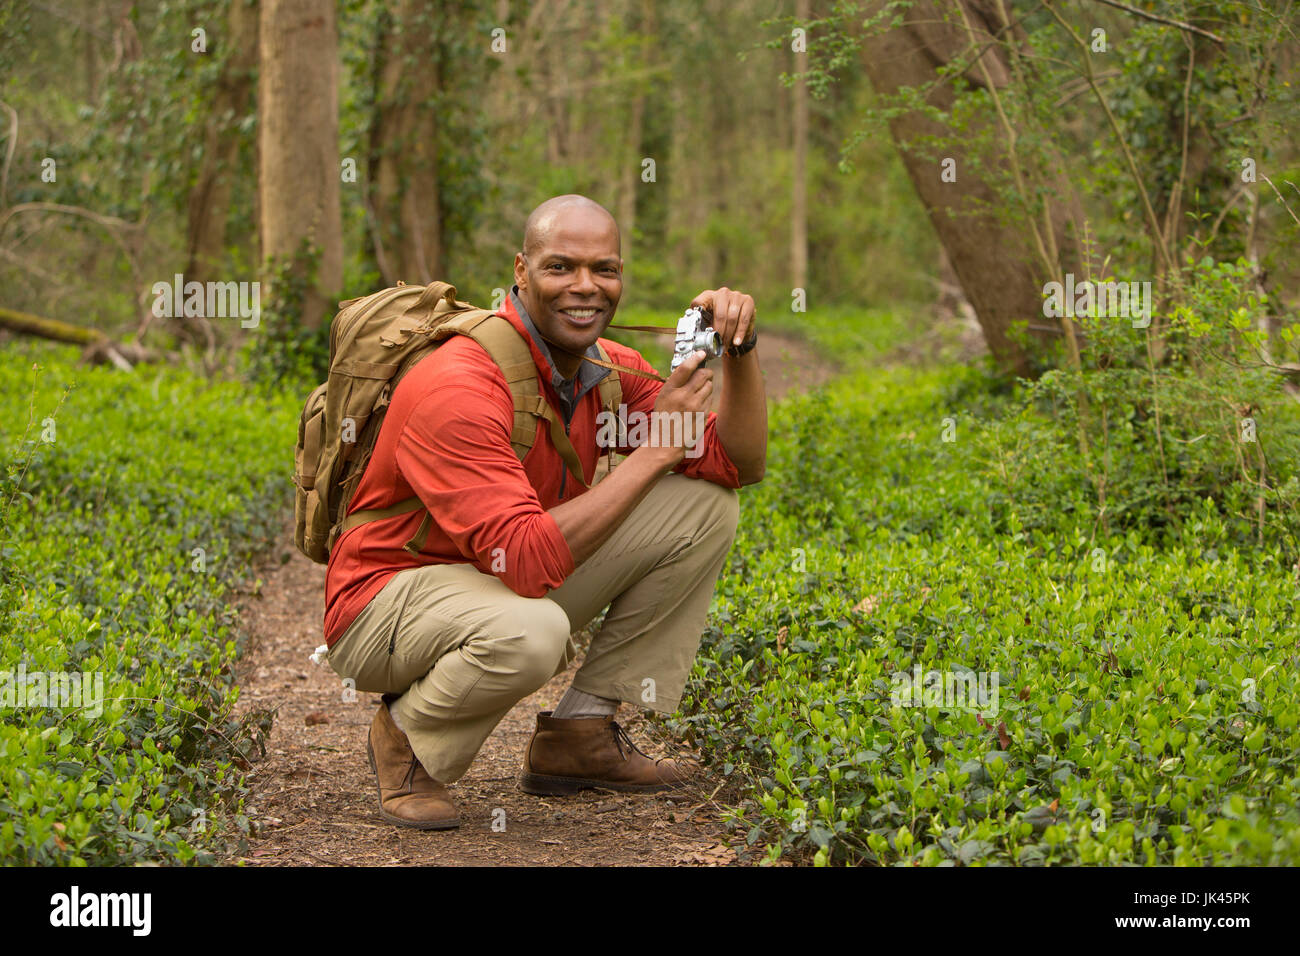 African American man crouching on path in forest holding camera Banque D'Images